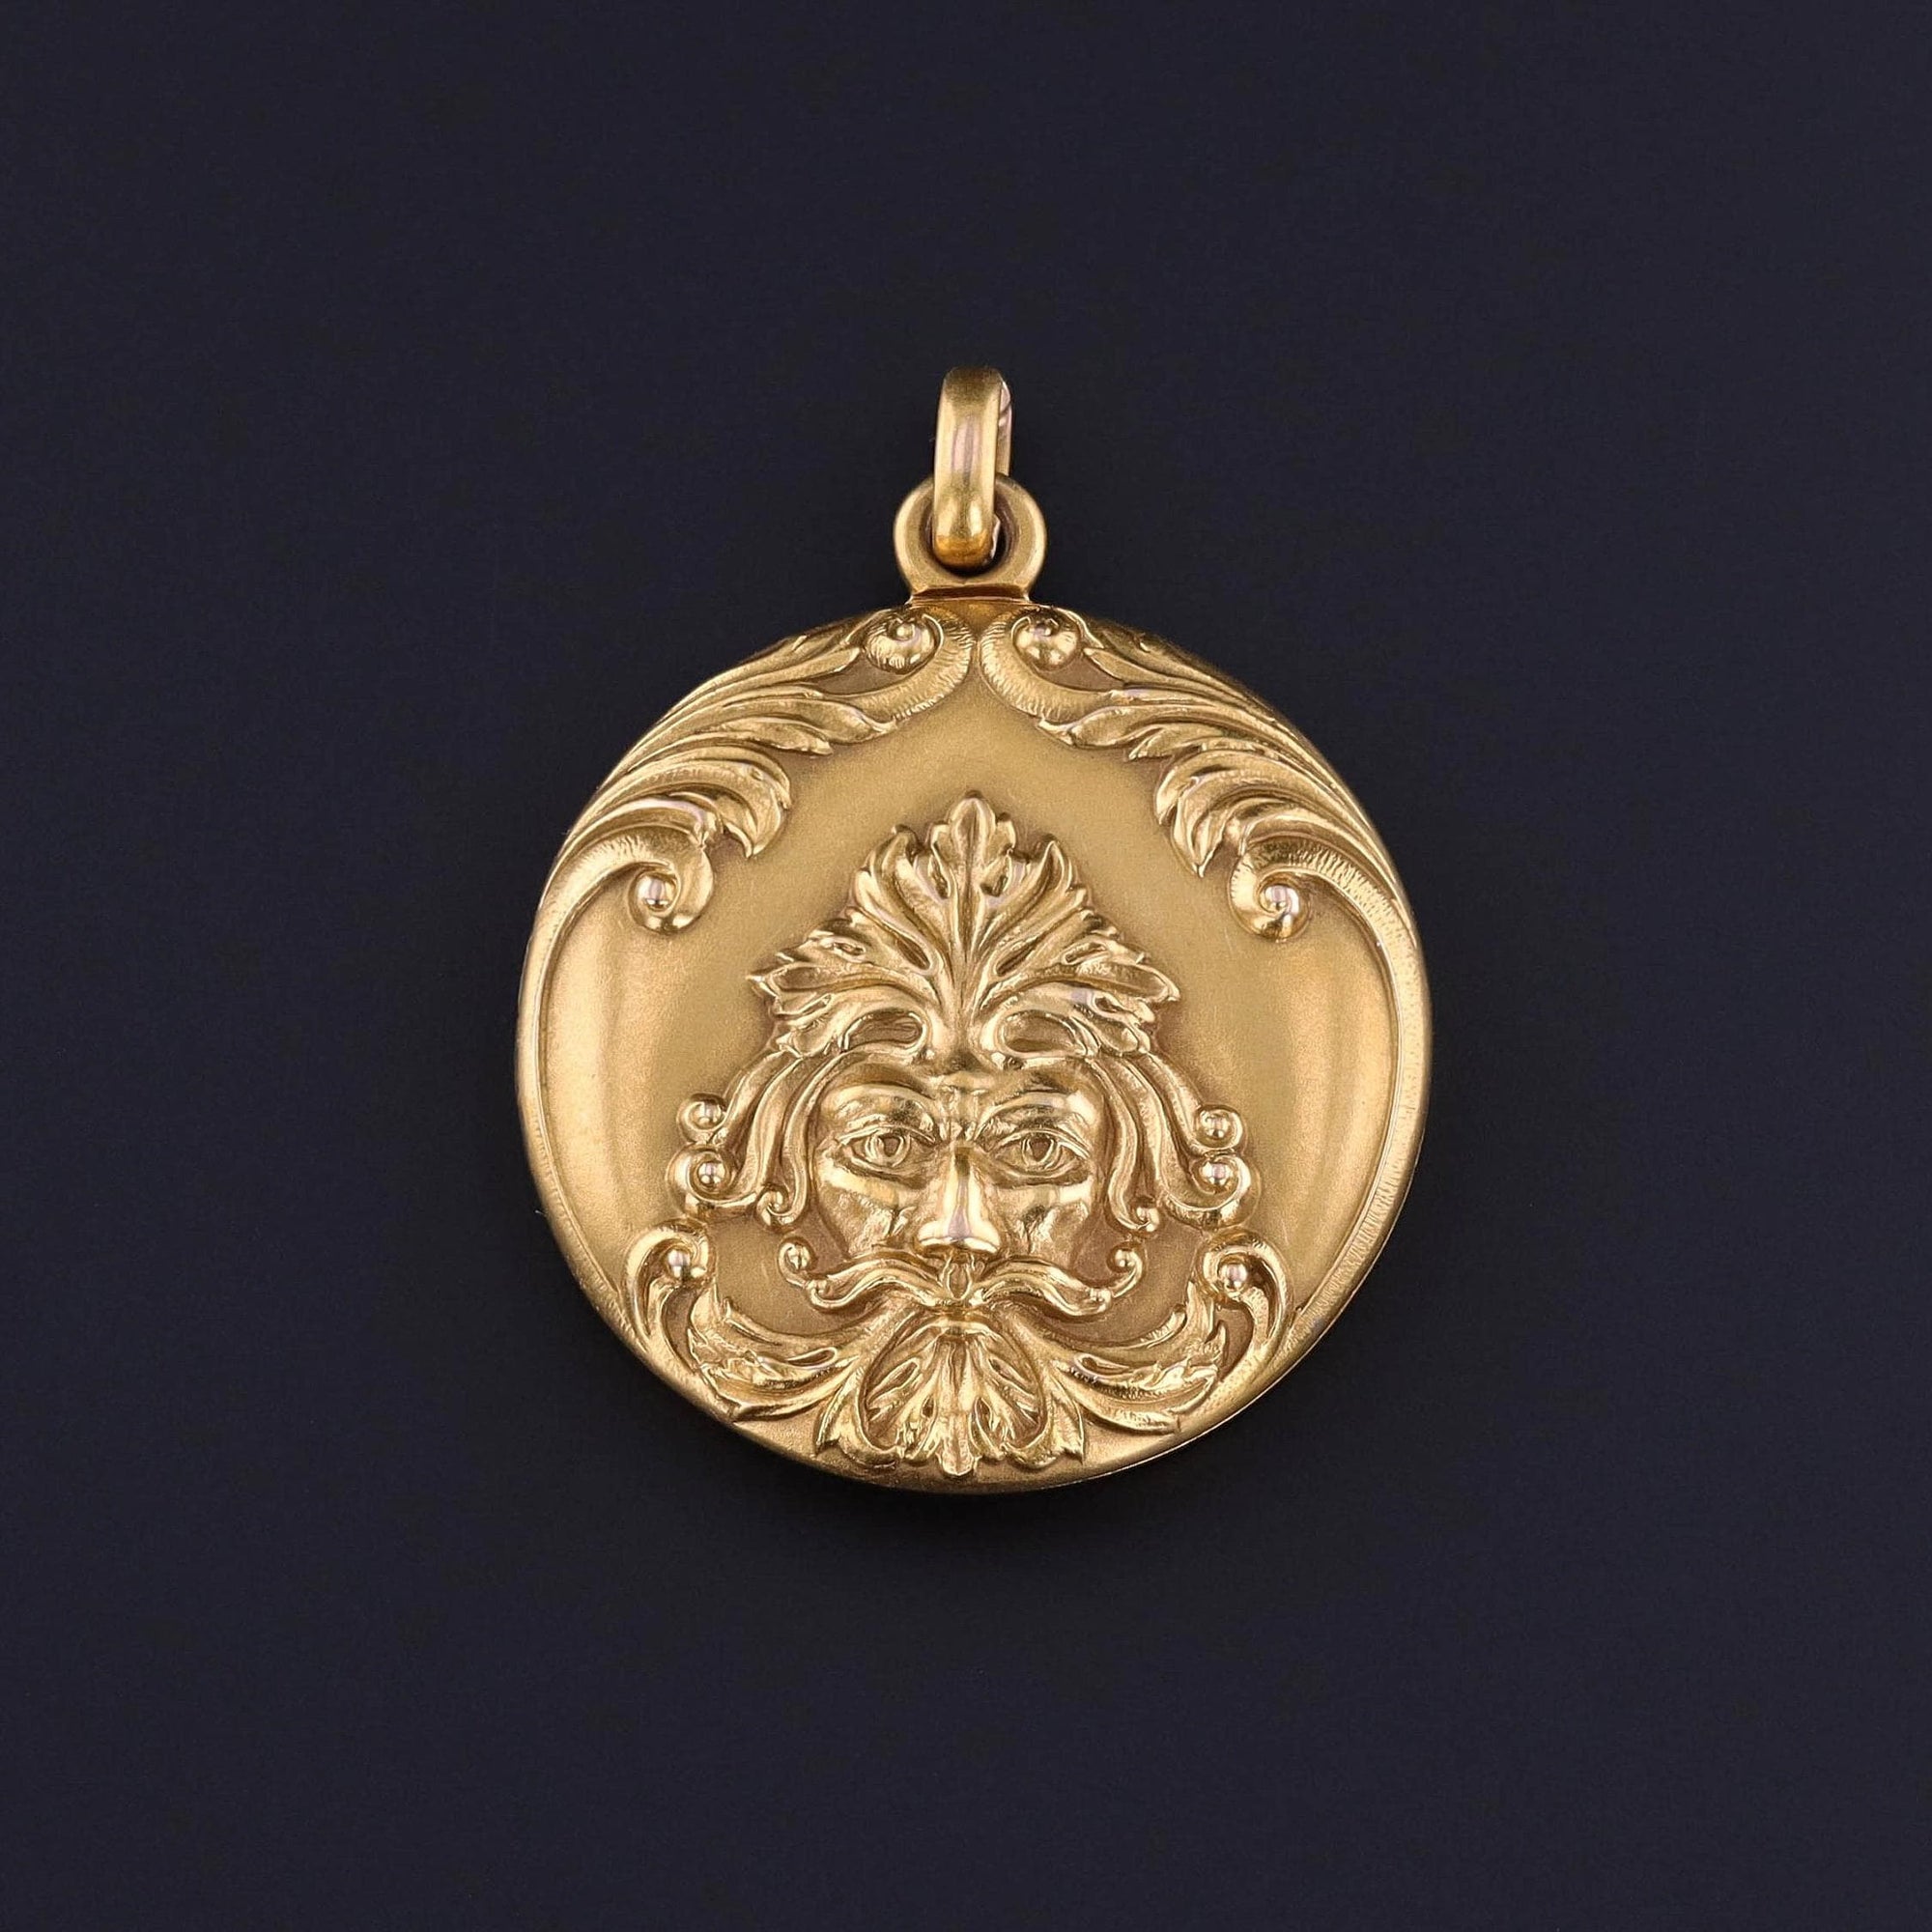 An antique green man locket from the turn of the 20th century. This locket is 14k gold with the initials JJS on the back. It is in great condition.